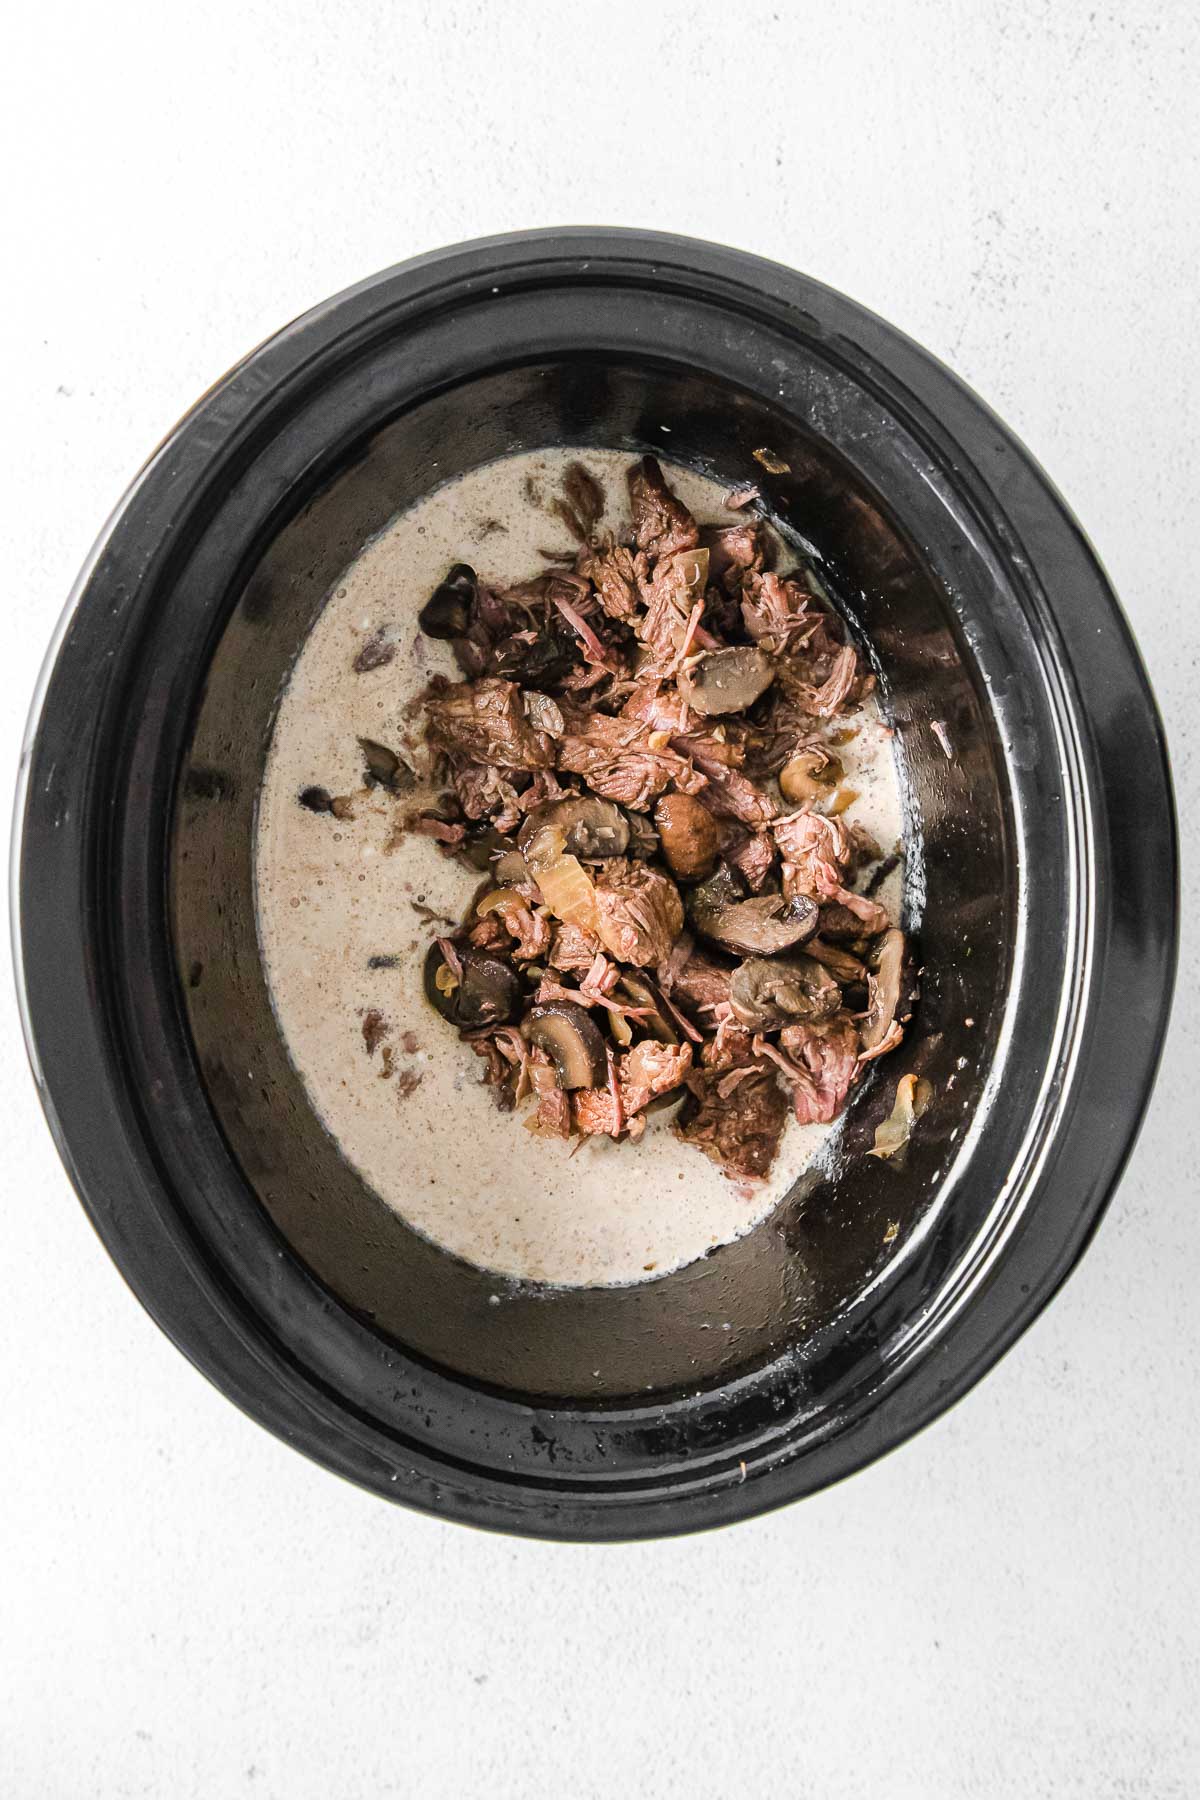 black slow cooker with creamy sauce with steak chunks